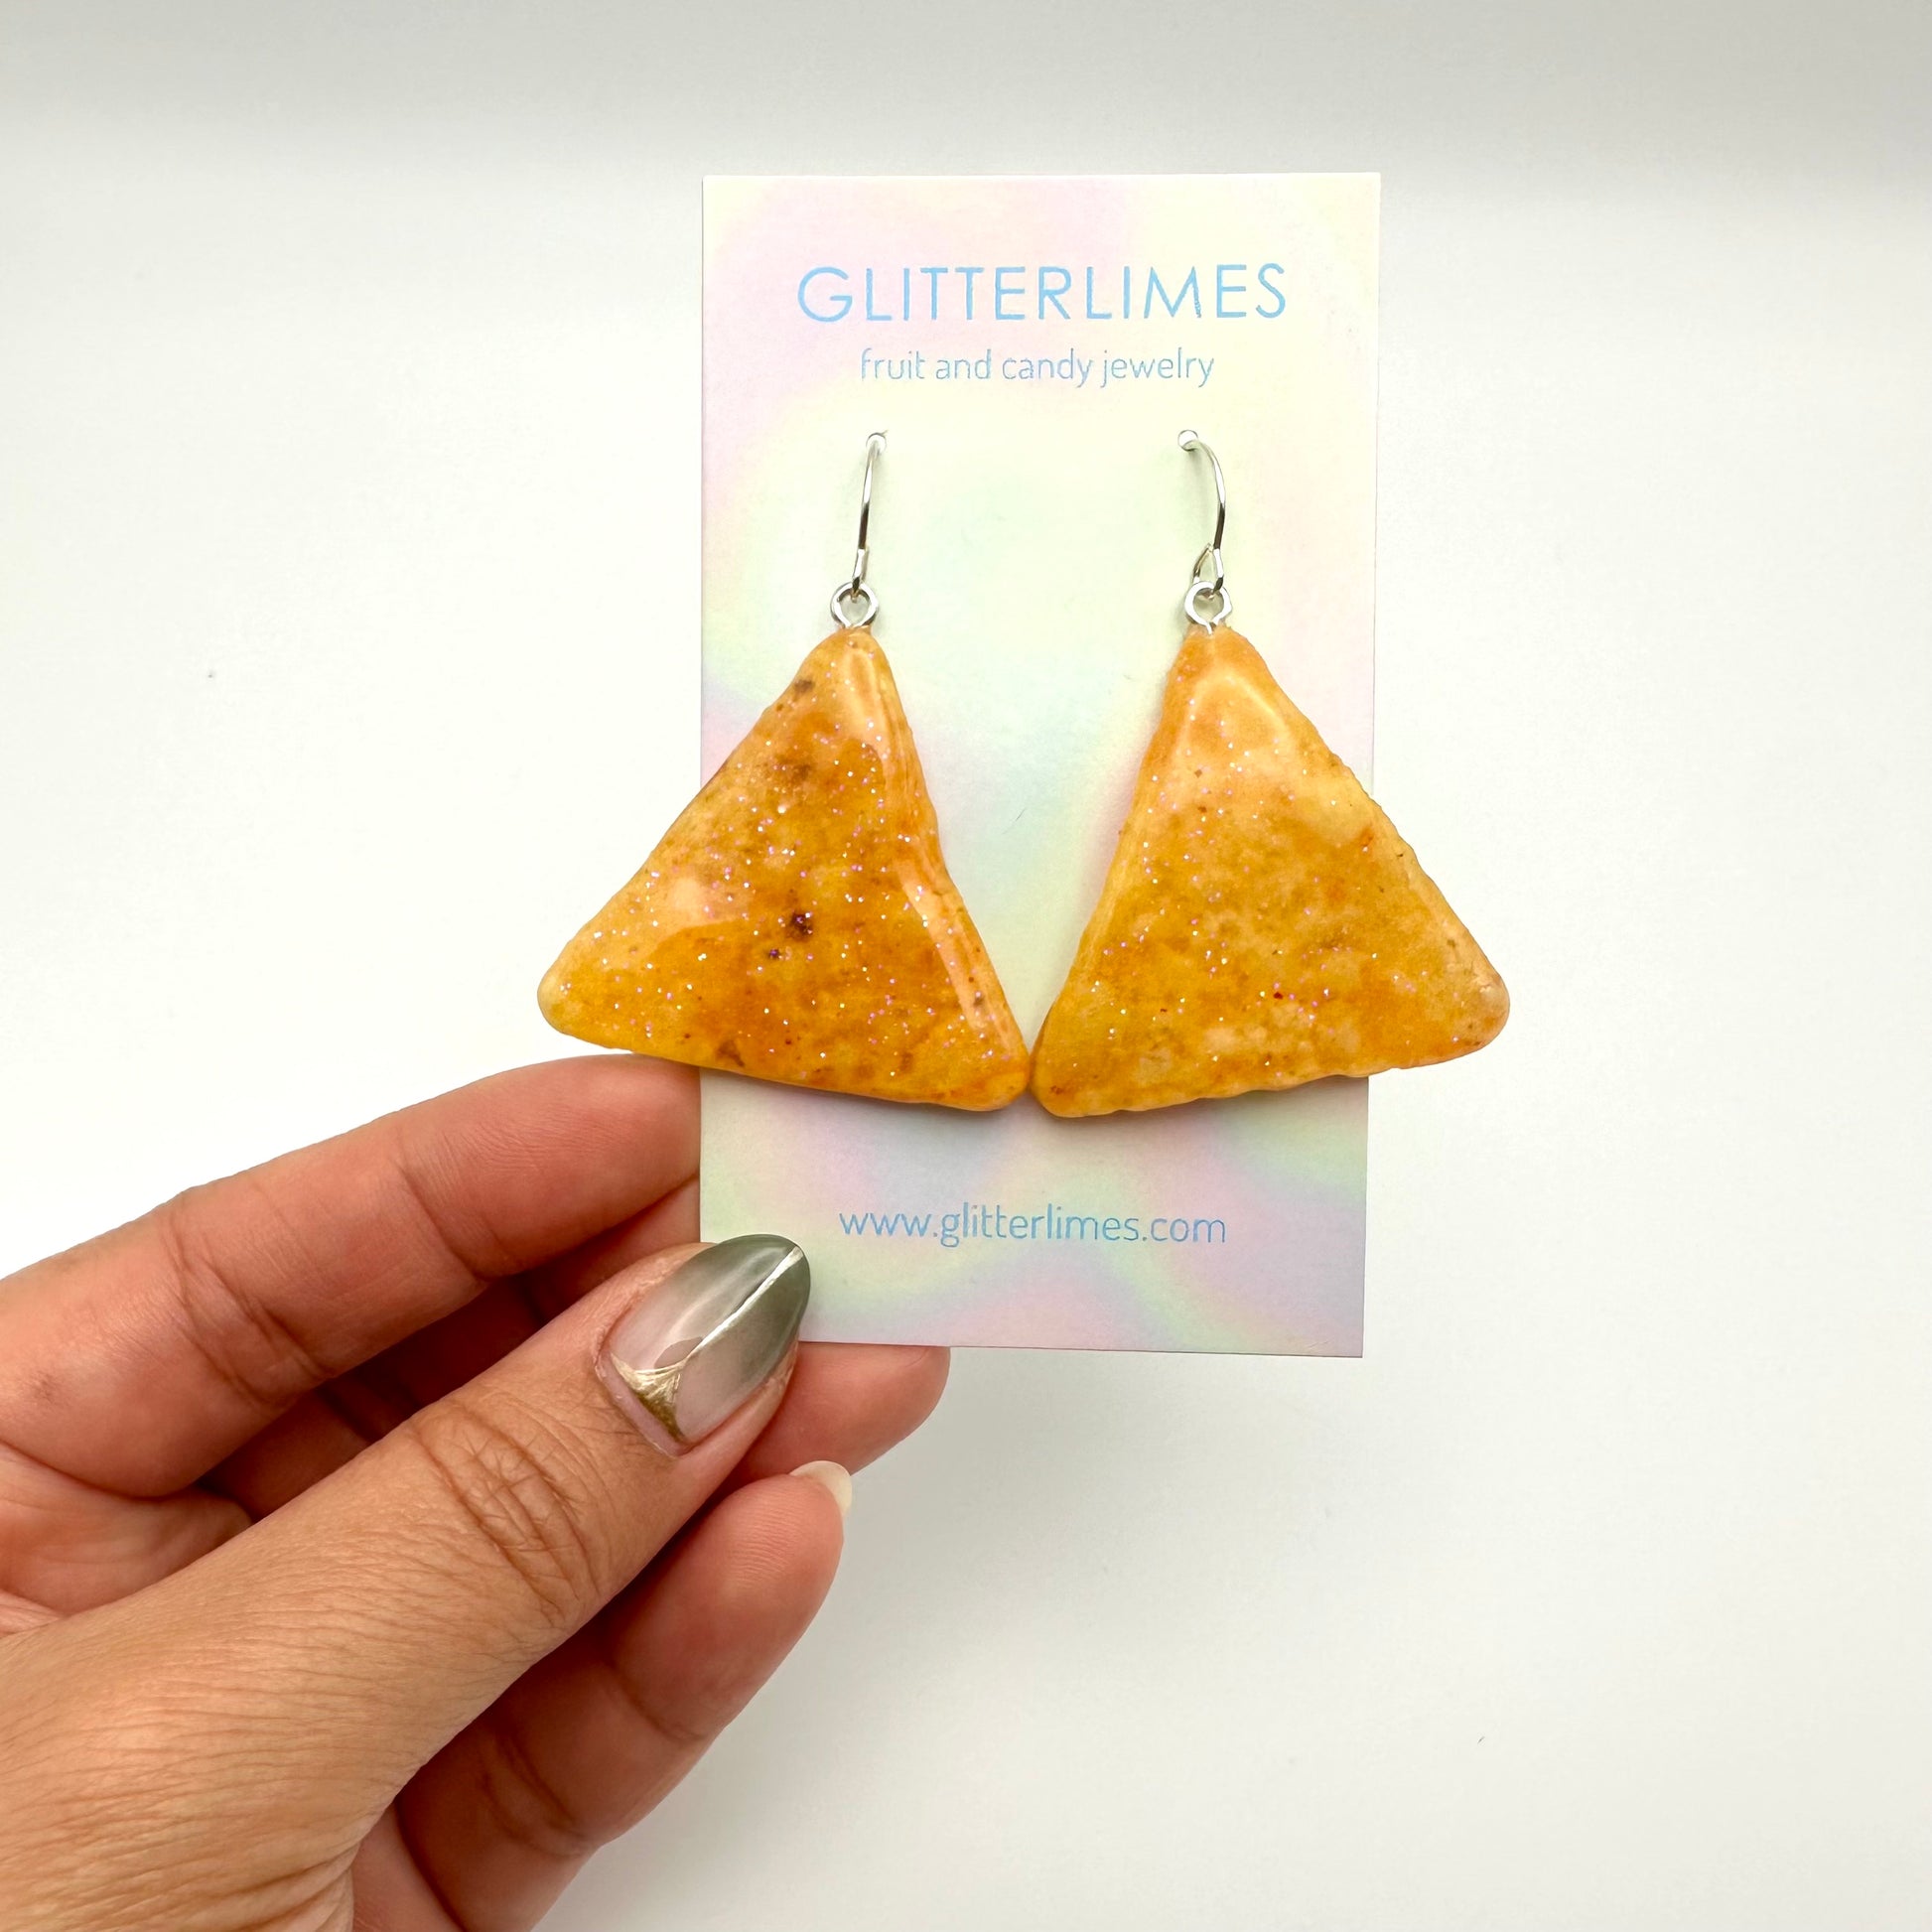 Tortilla chip earrings dipped in resin with glitter. On a card backing that says" Glitterlimes fruit and candy jewelry".